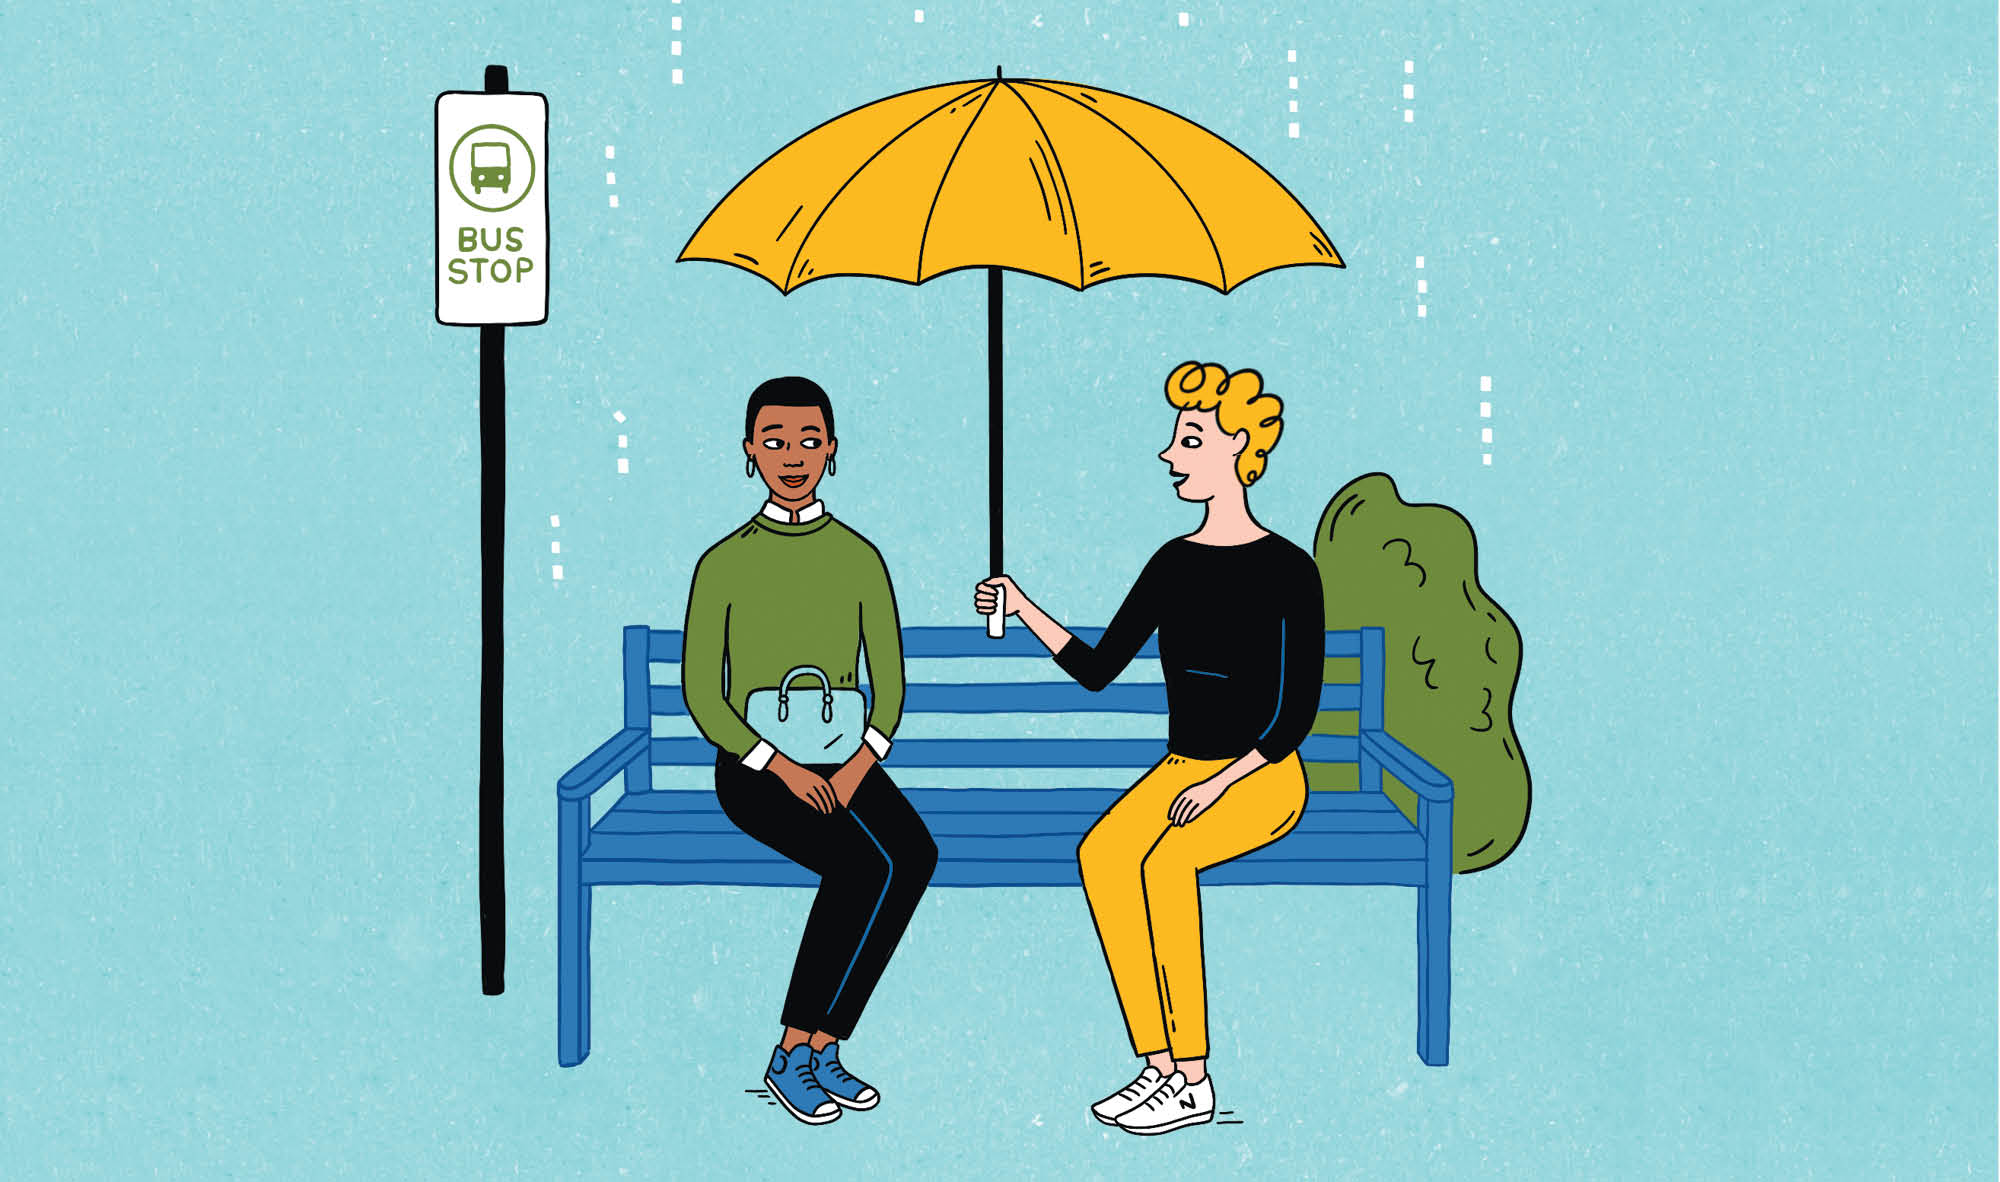 Two strangers sitting under an umbrella at a bus stop.